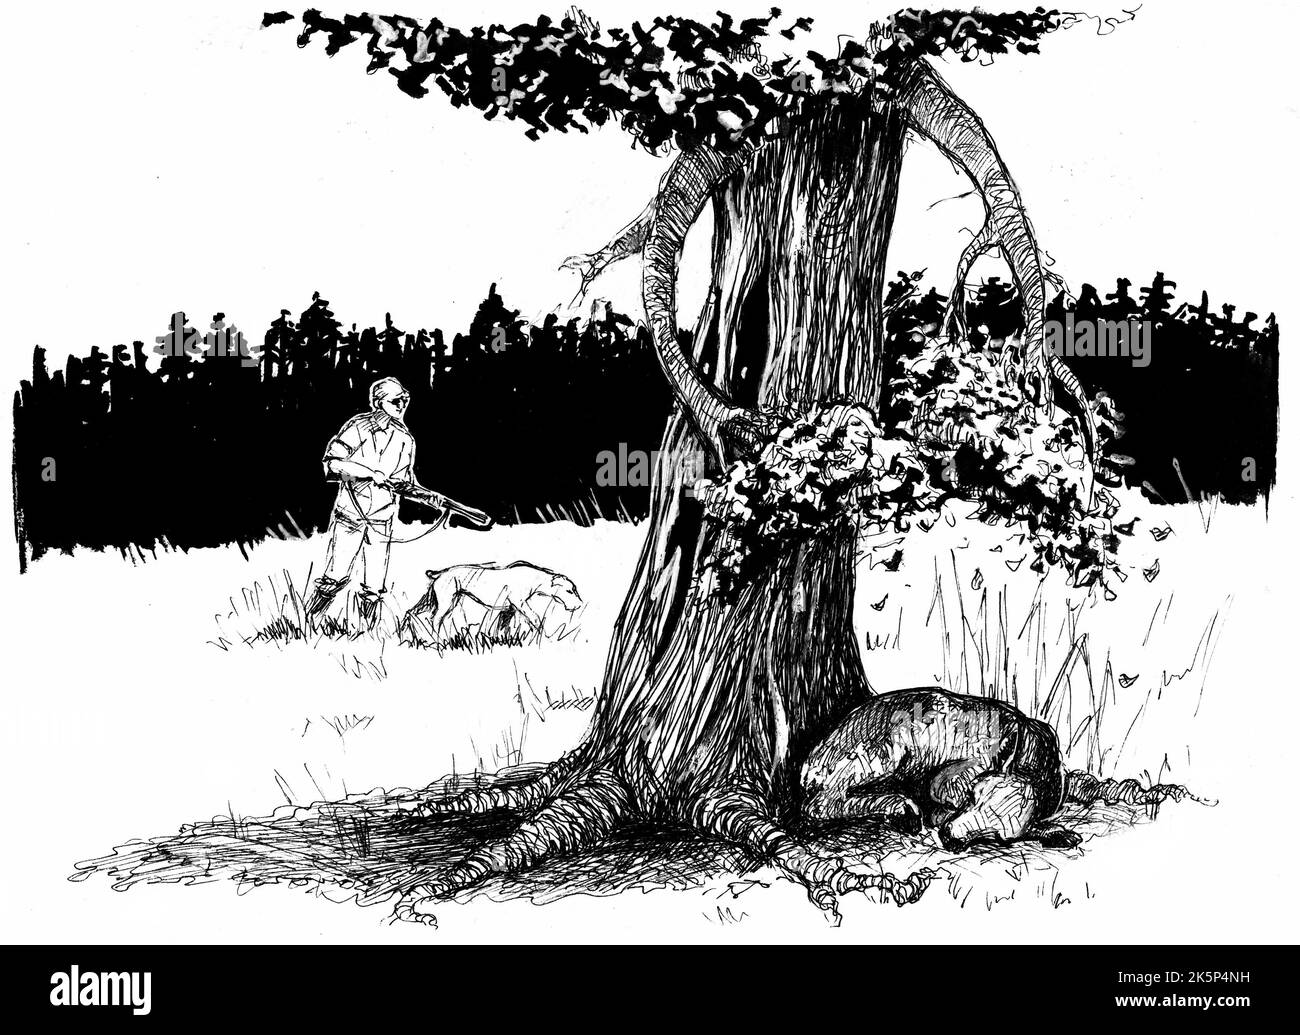 A tree tries to hide a deer sleeping in its shade from an approaching hunter. Monochrome illustration done with pen and paint. Stock Photo